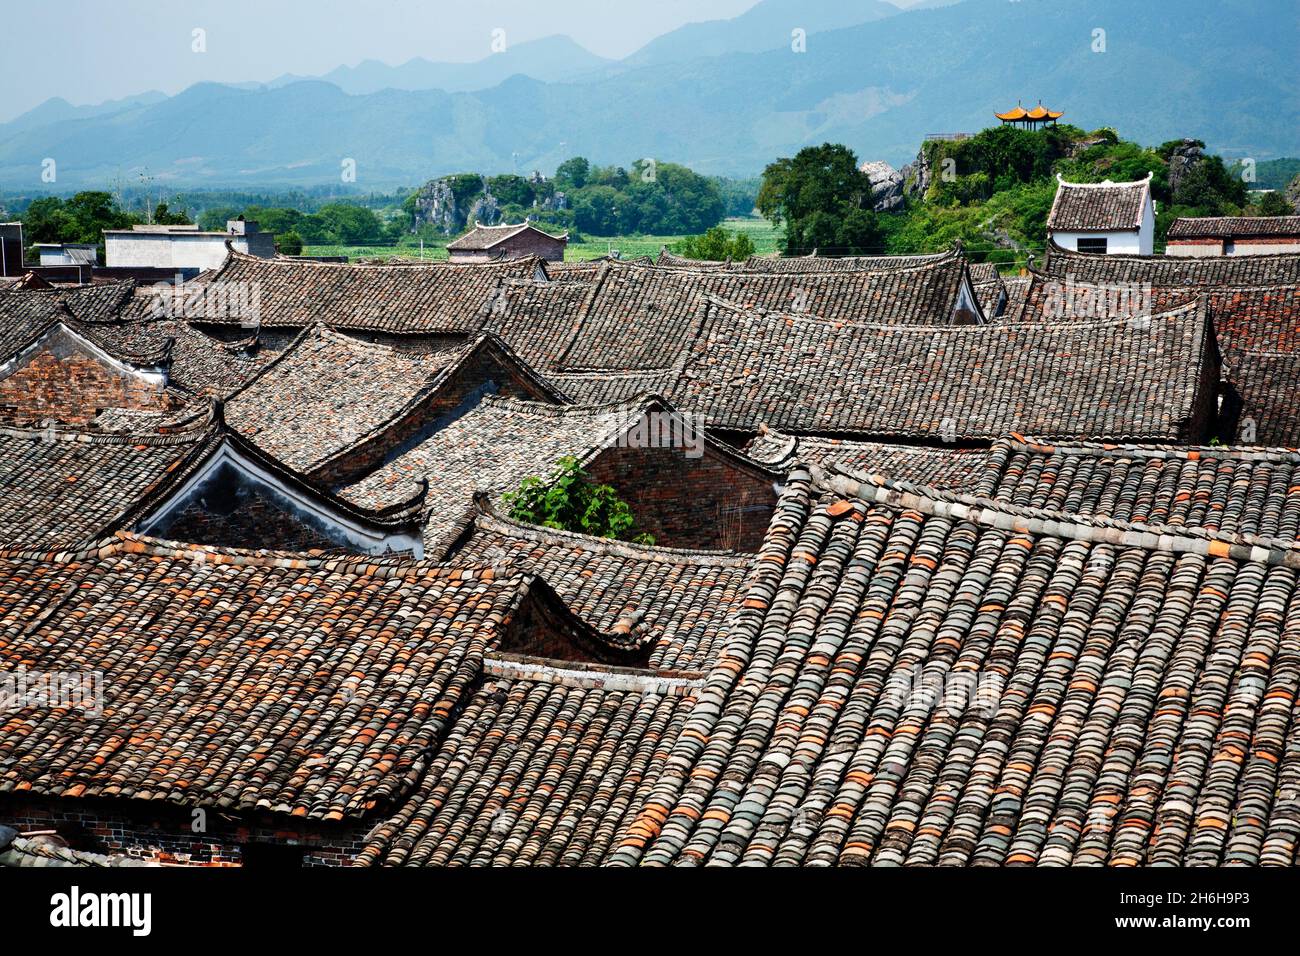 Roof tops of an ancient town in Hunan Province, China Stock Photo